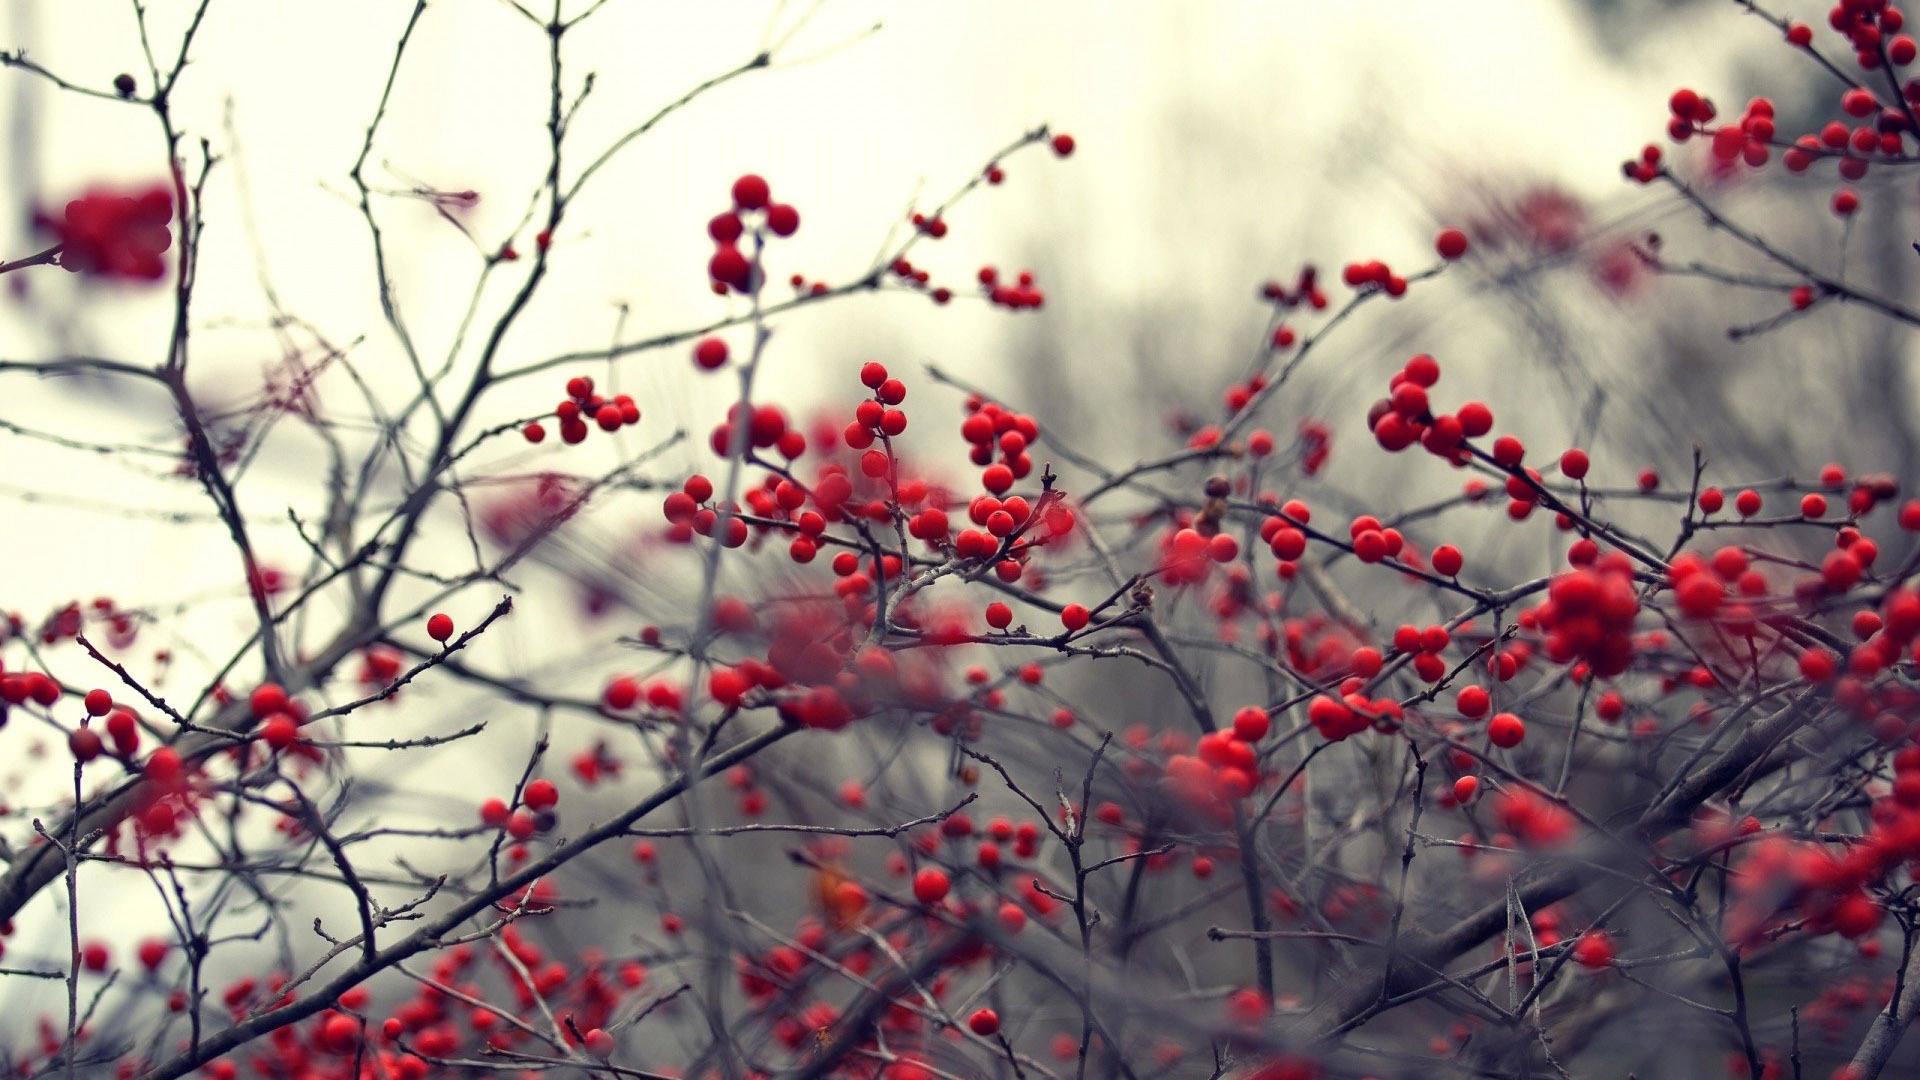 Red berries on branches Wallpaper Original HD Wallpapers 1920x1080